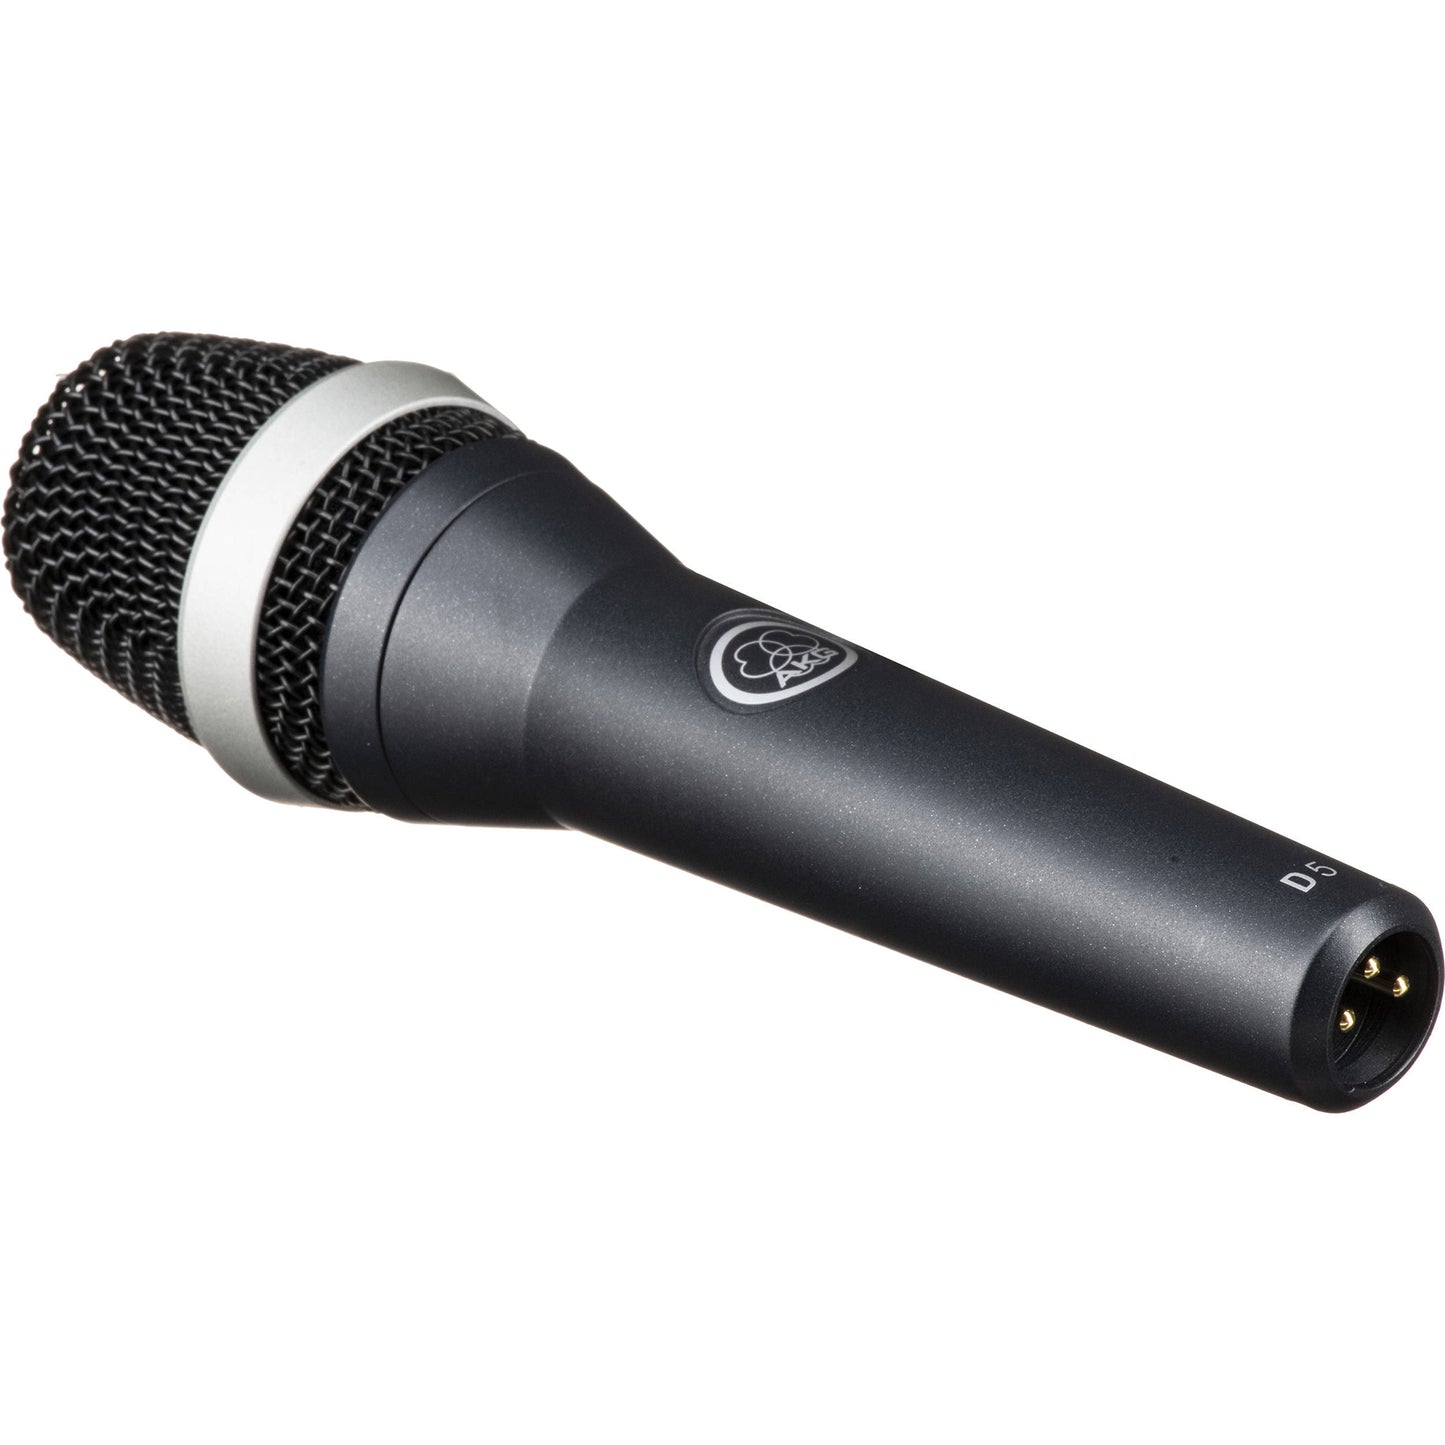 AKG D5 Dynamic Supercardoid Handheld Mic with Switch